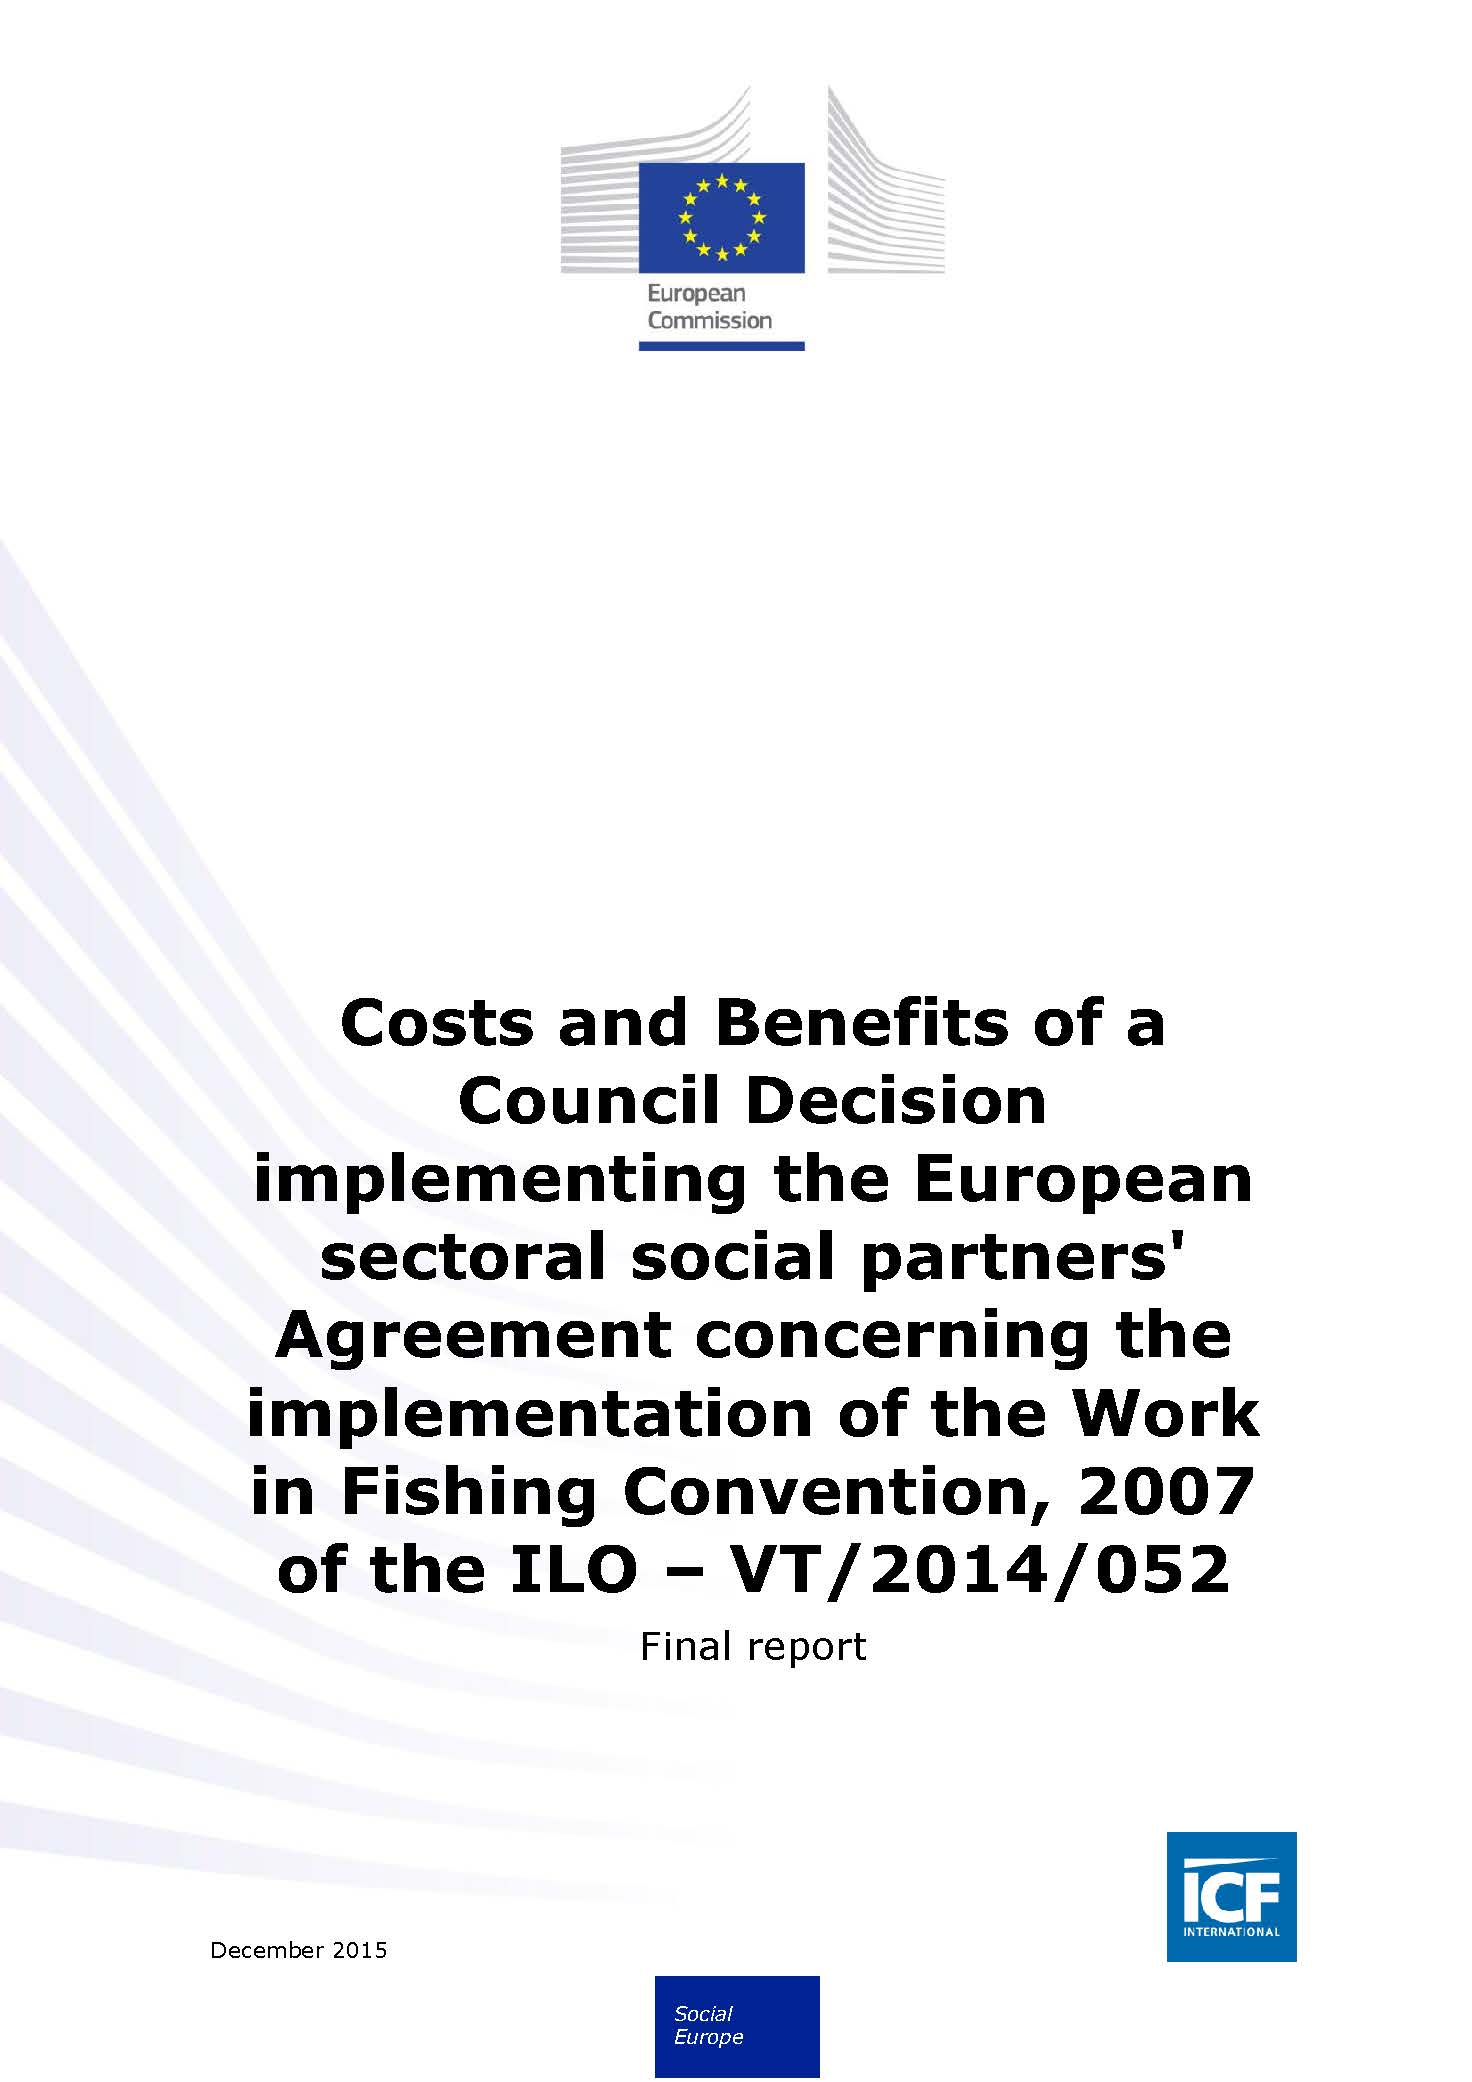 Costs and Benefits of a Council Decision implementing the European sectoral social partners' Agreement concerning the implementation of the Work in Fishing Convention, 2007 of the ILO